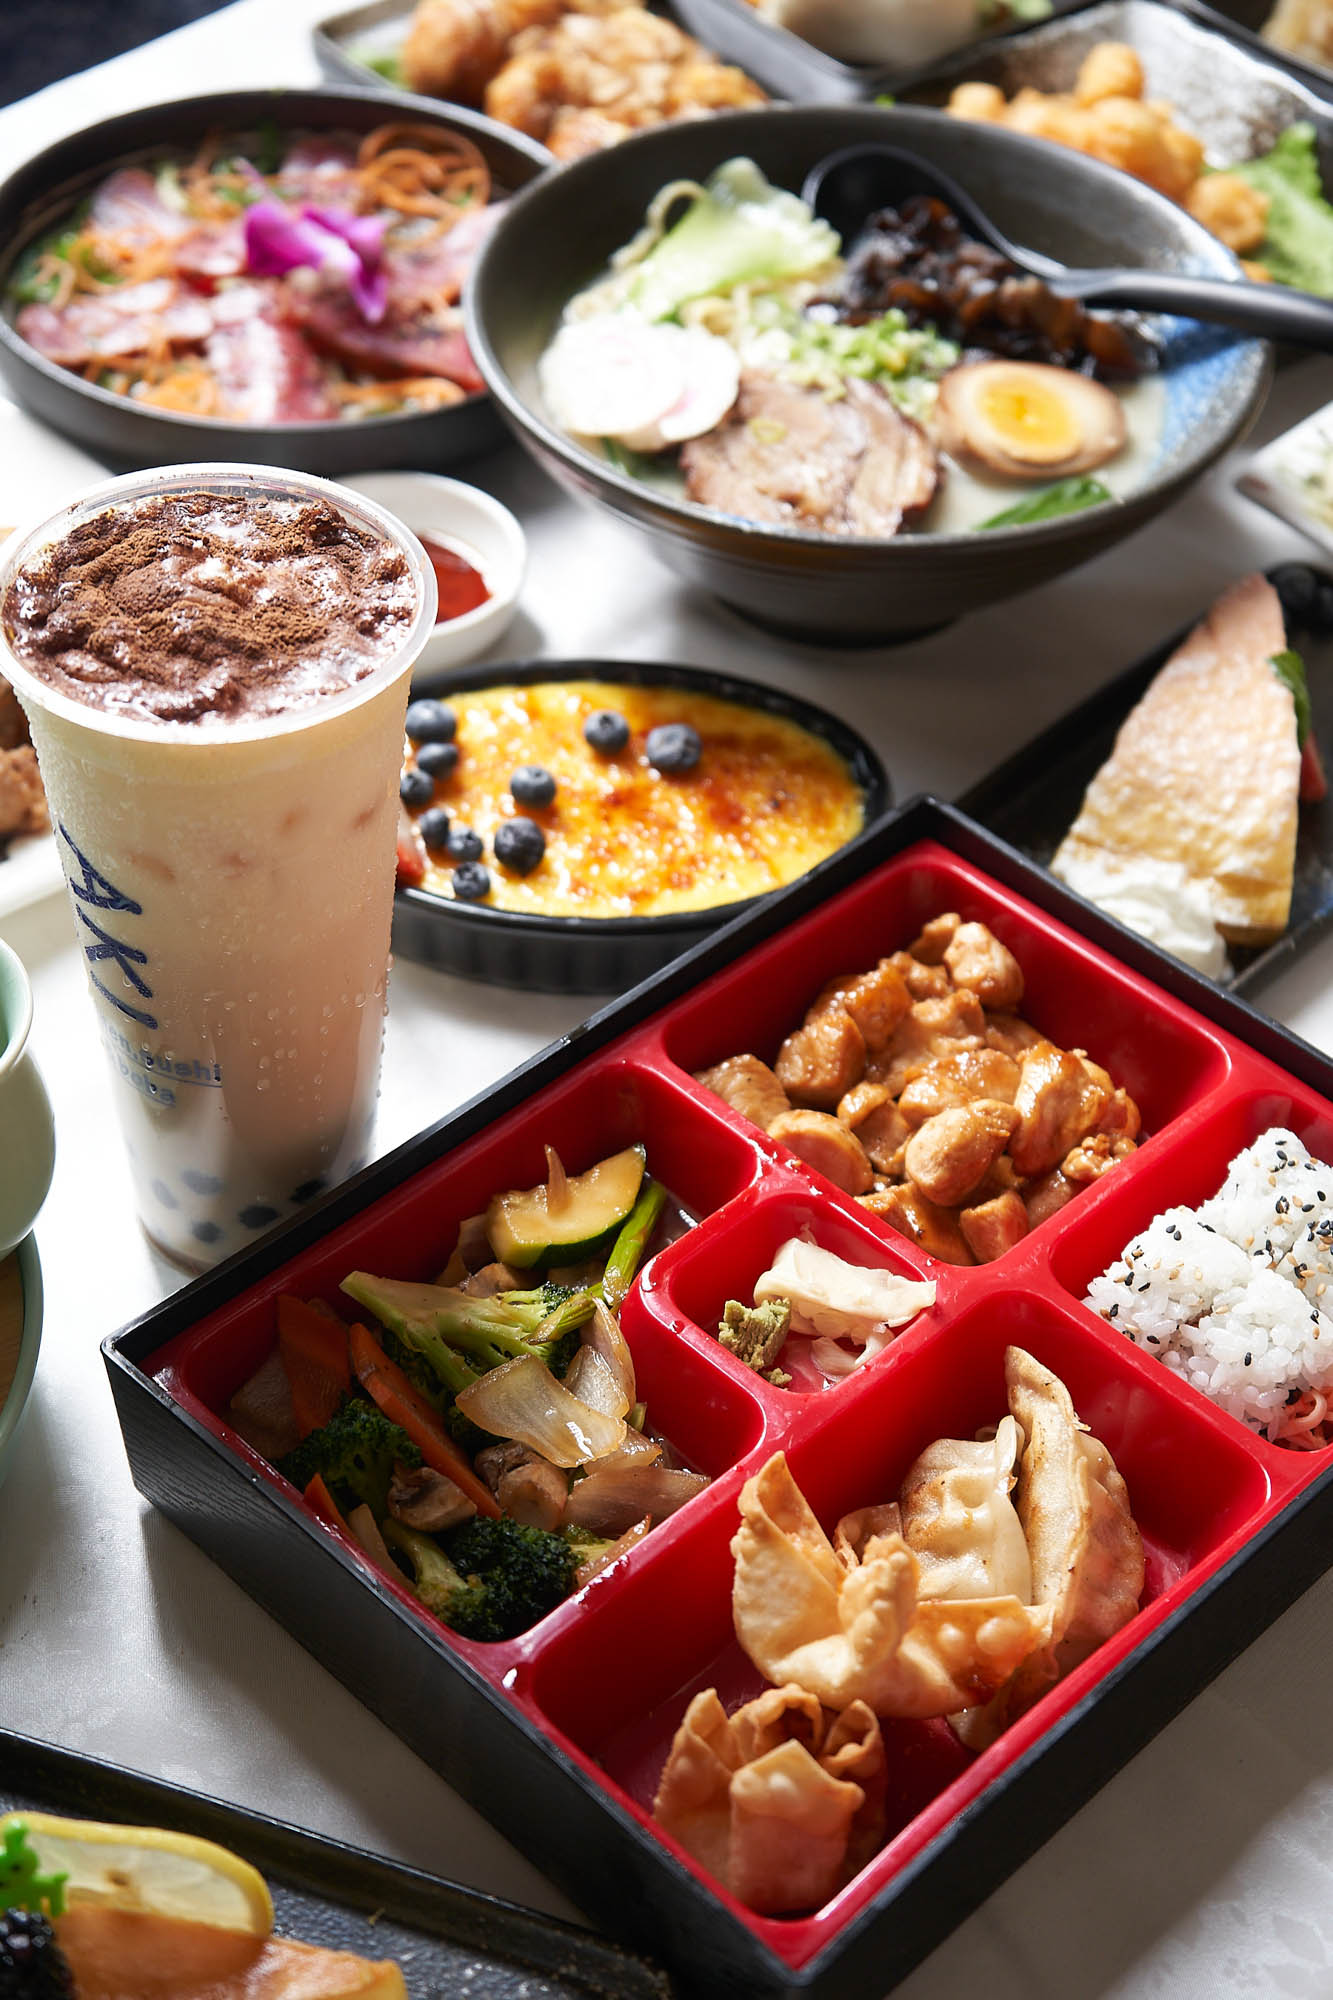 Chicken Teriyaki Bento Box with different food plates on the table